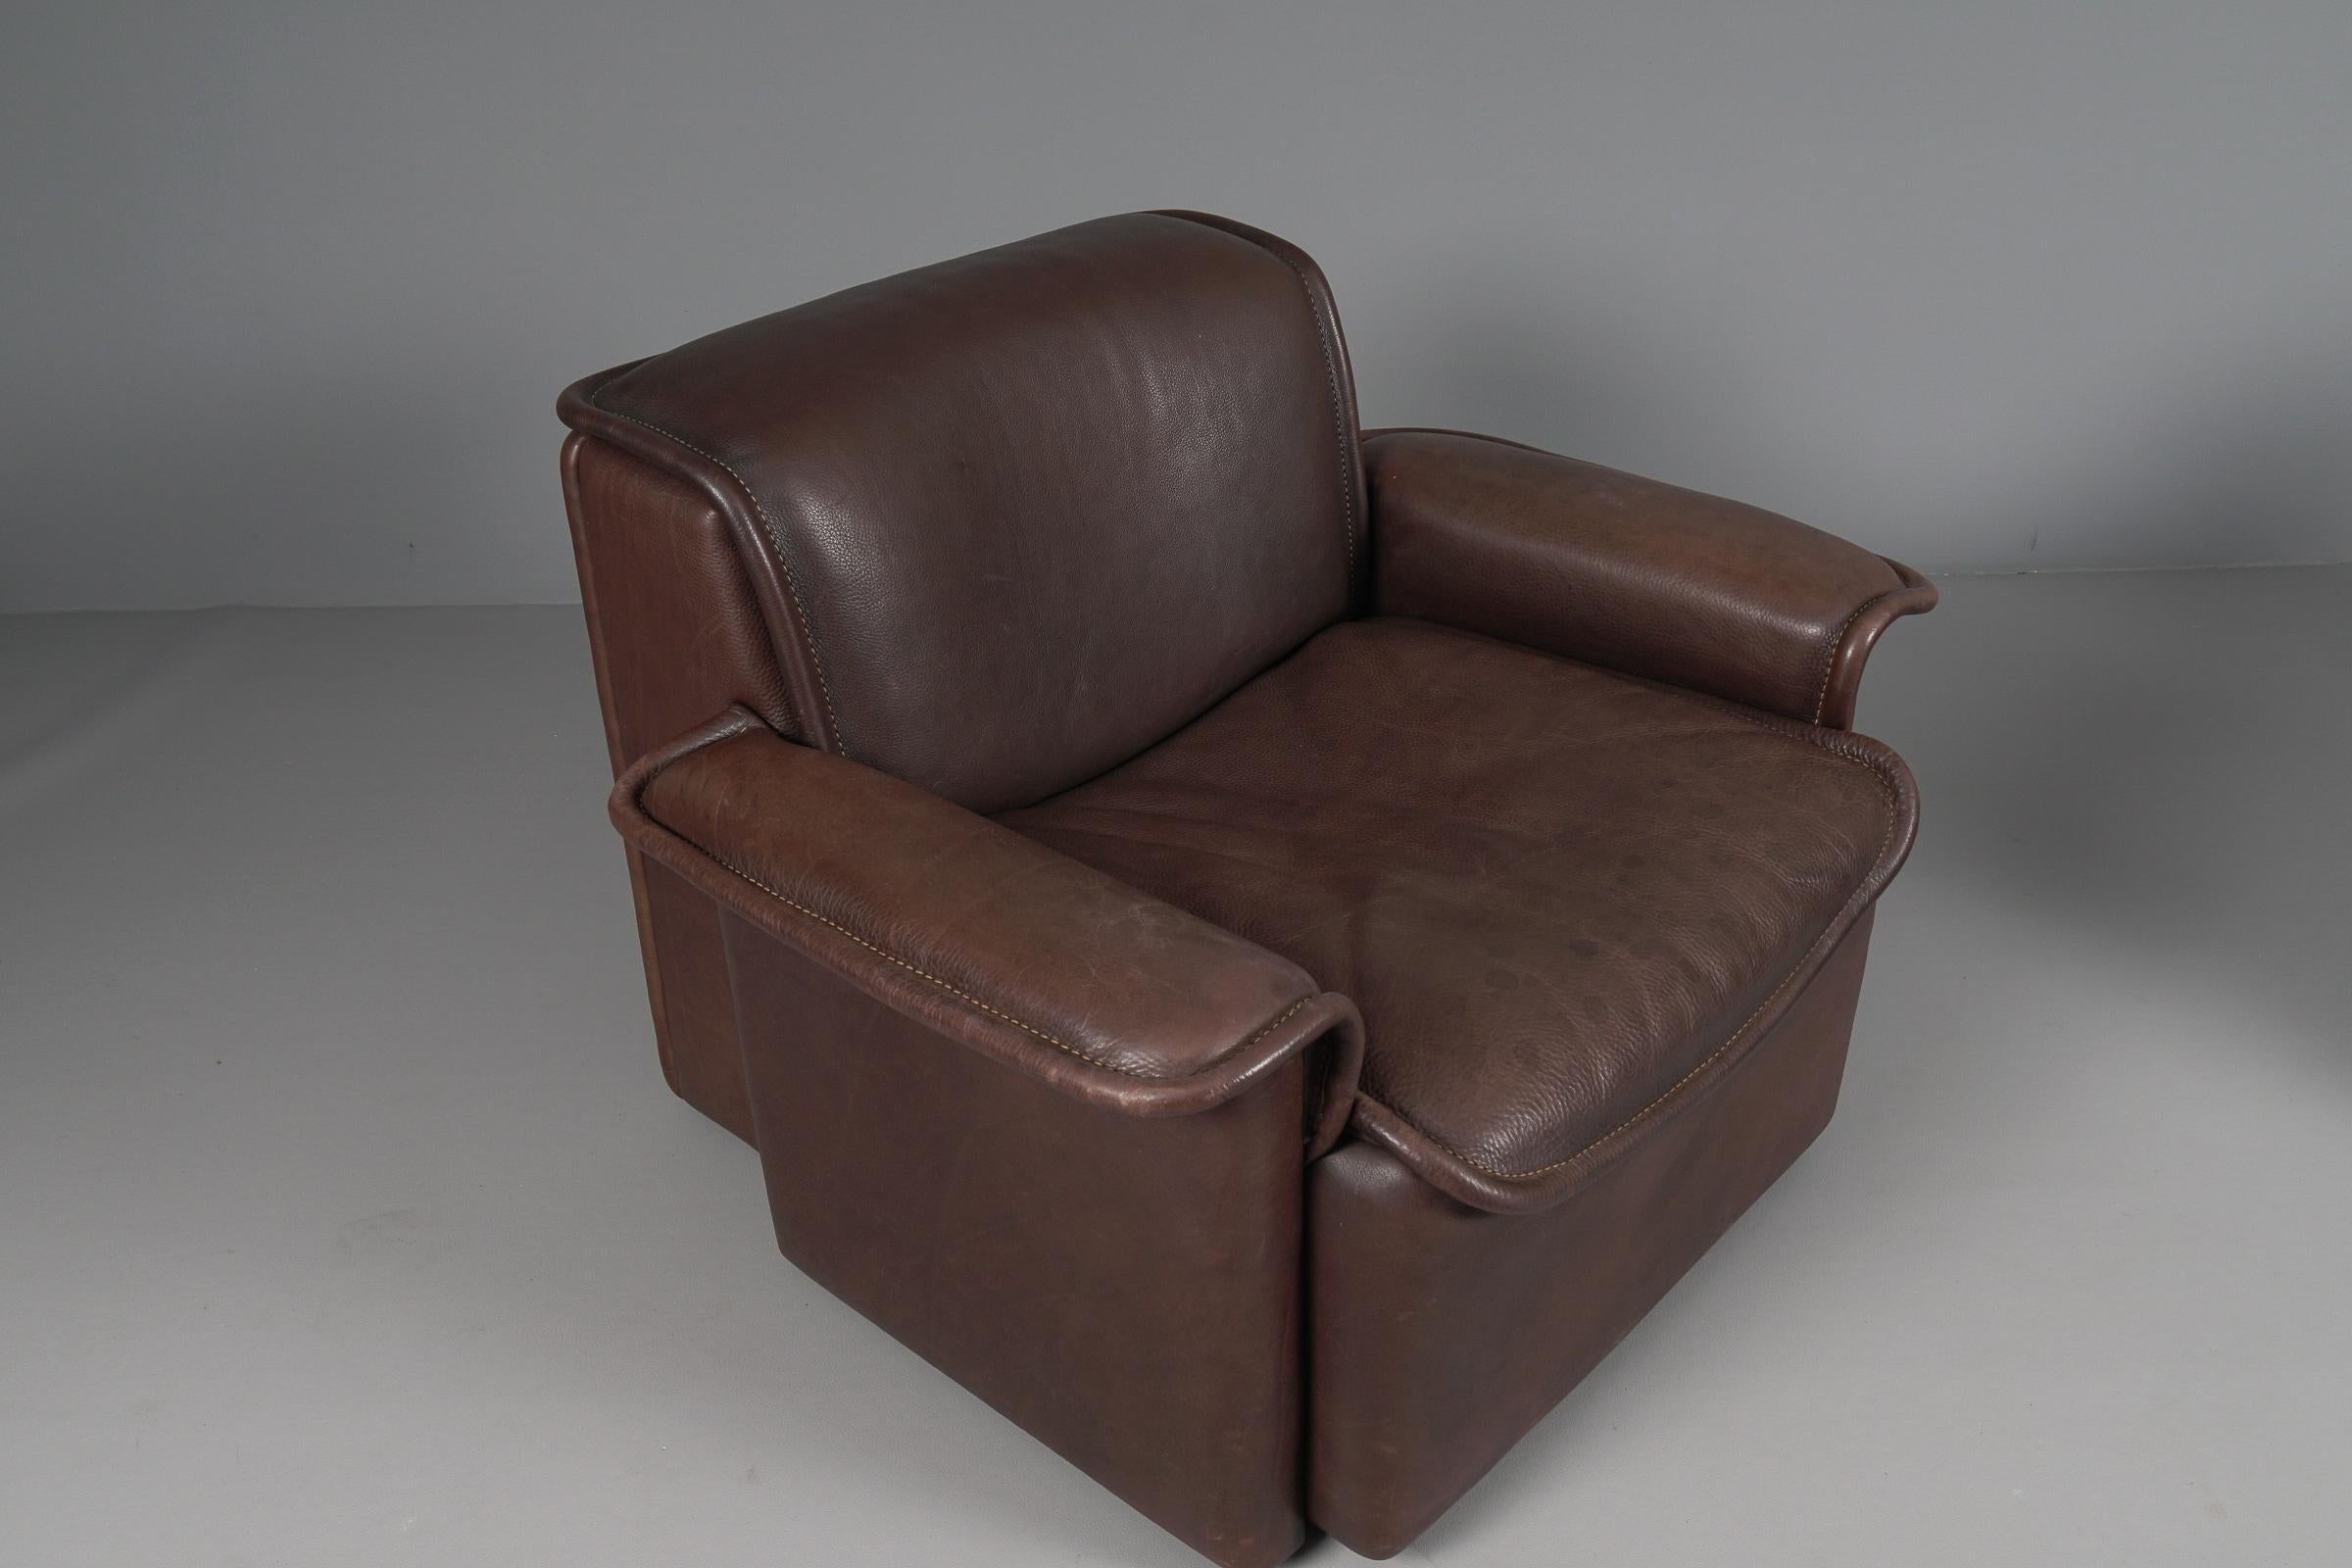 Two Armchairs by De Sede DS-12 in Brown Neck Leather, 1960s, Switzerland For Sale 2